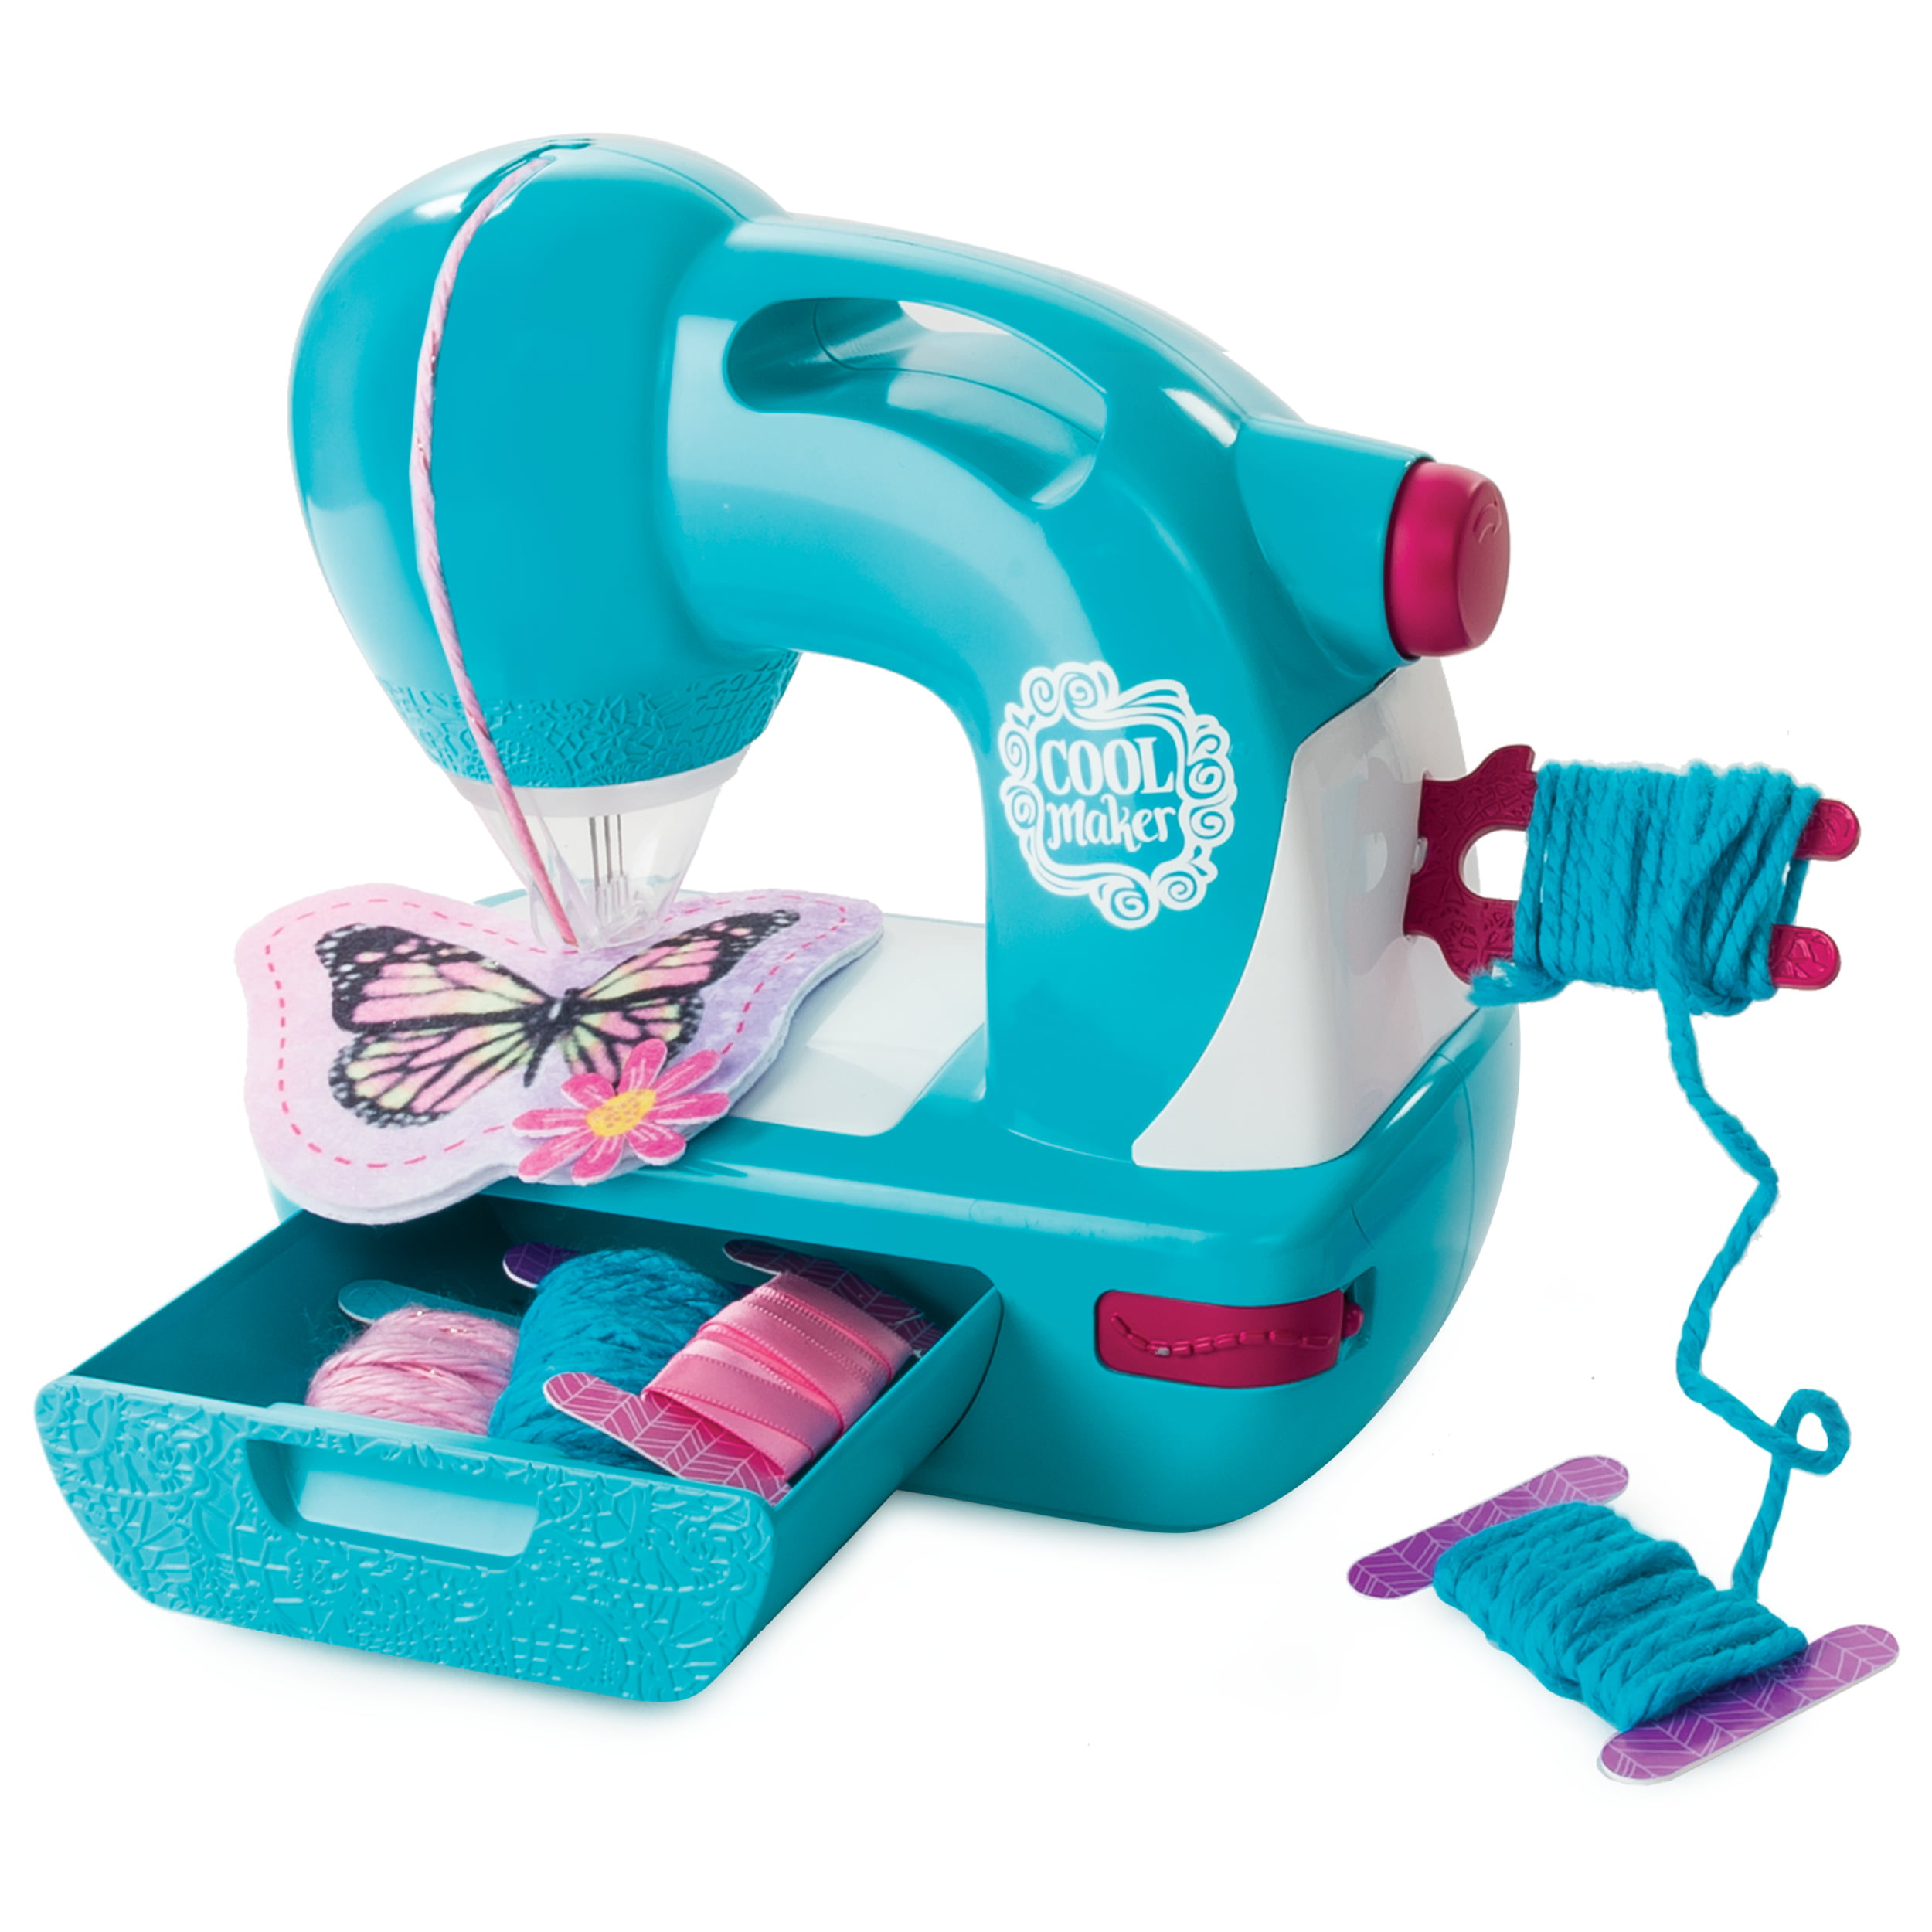  Cool Maker Sew Cool Sewing Machine with 5 Trendy Projects and  Fabric, for Kids 6 Aged and Up : Arts, Crafts & Sewing